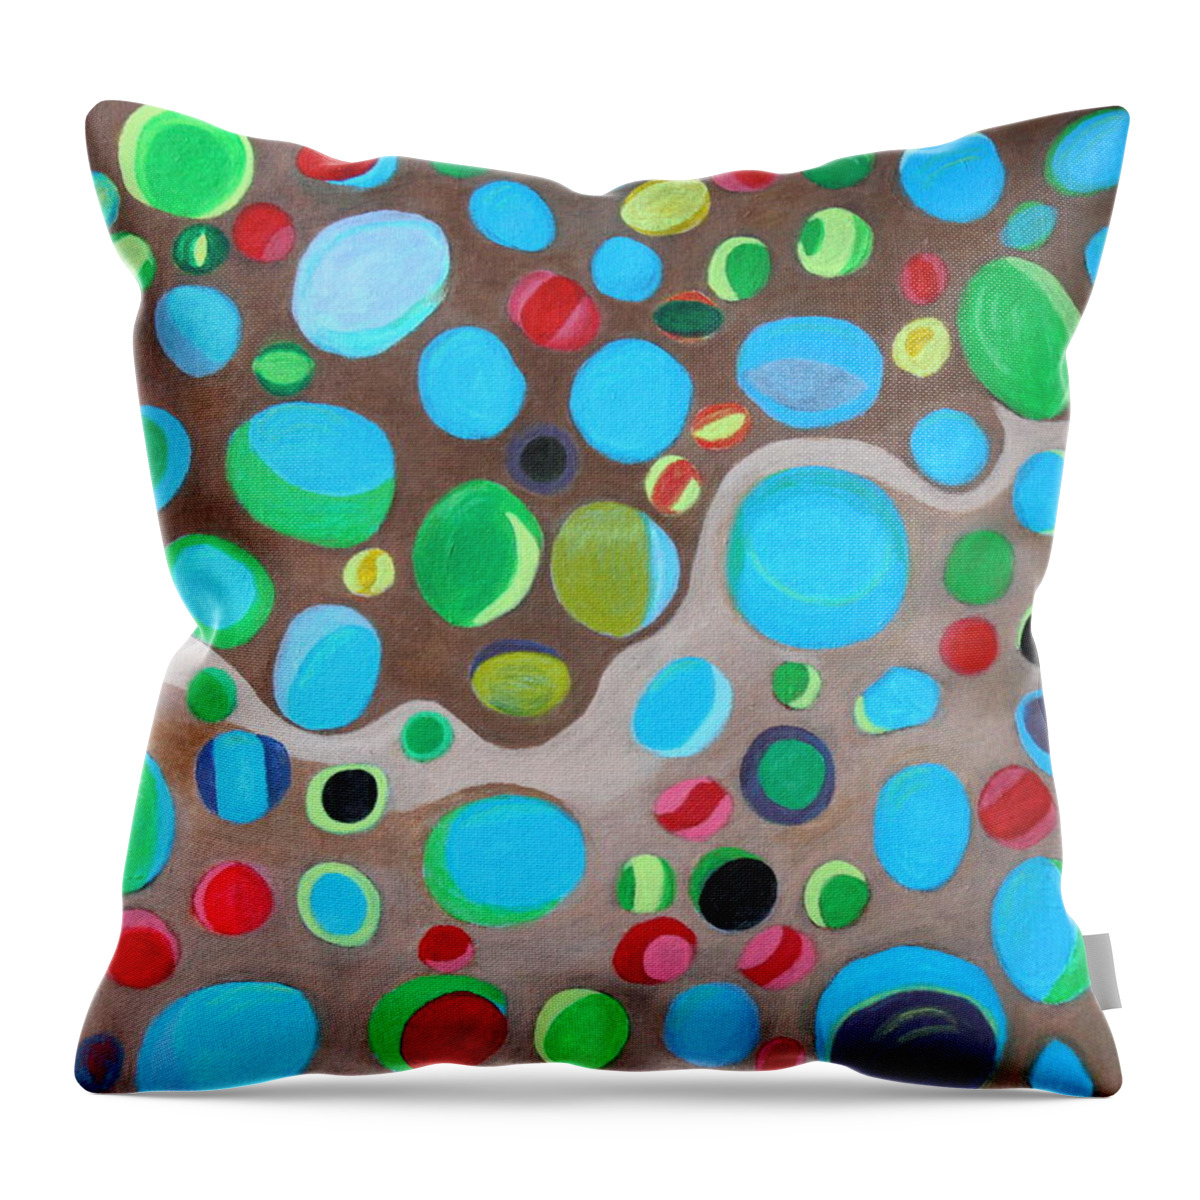 All Apparels Throw Pillow featuring the painting Riches Of People On Earth by Lorna Maza